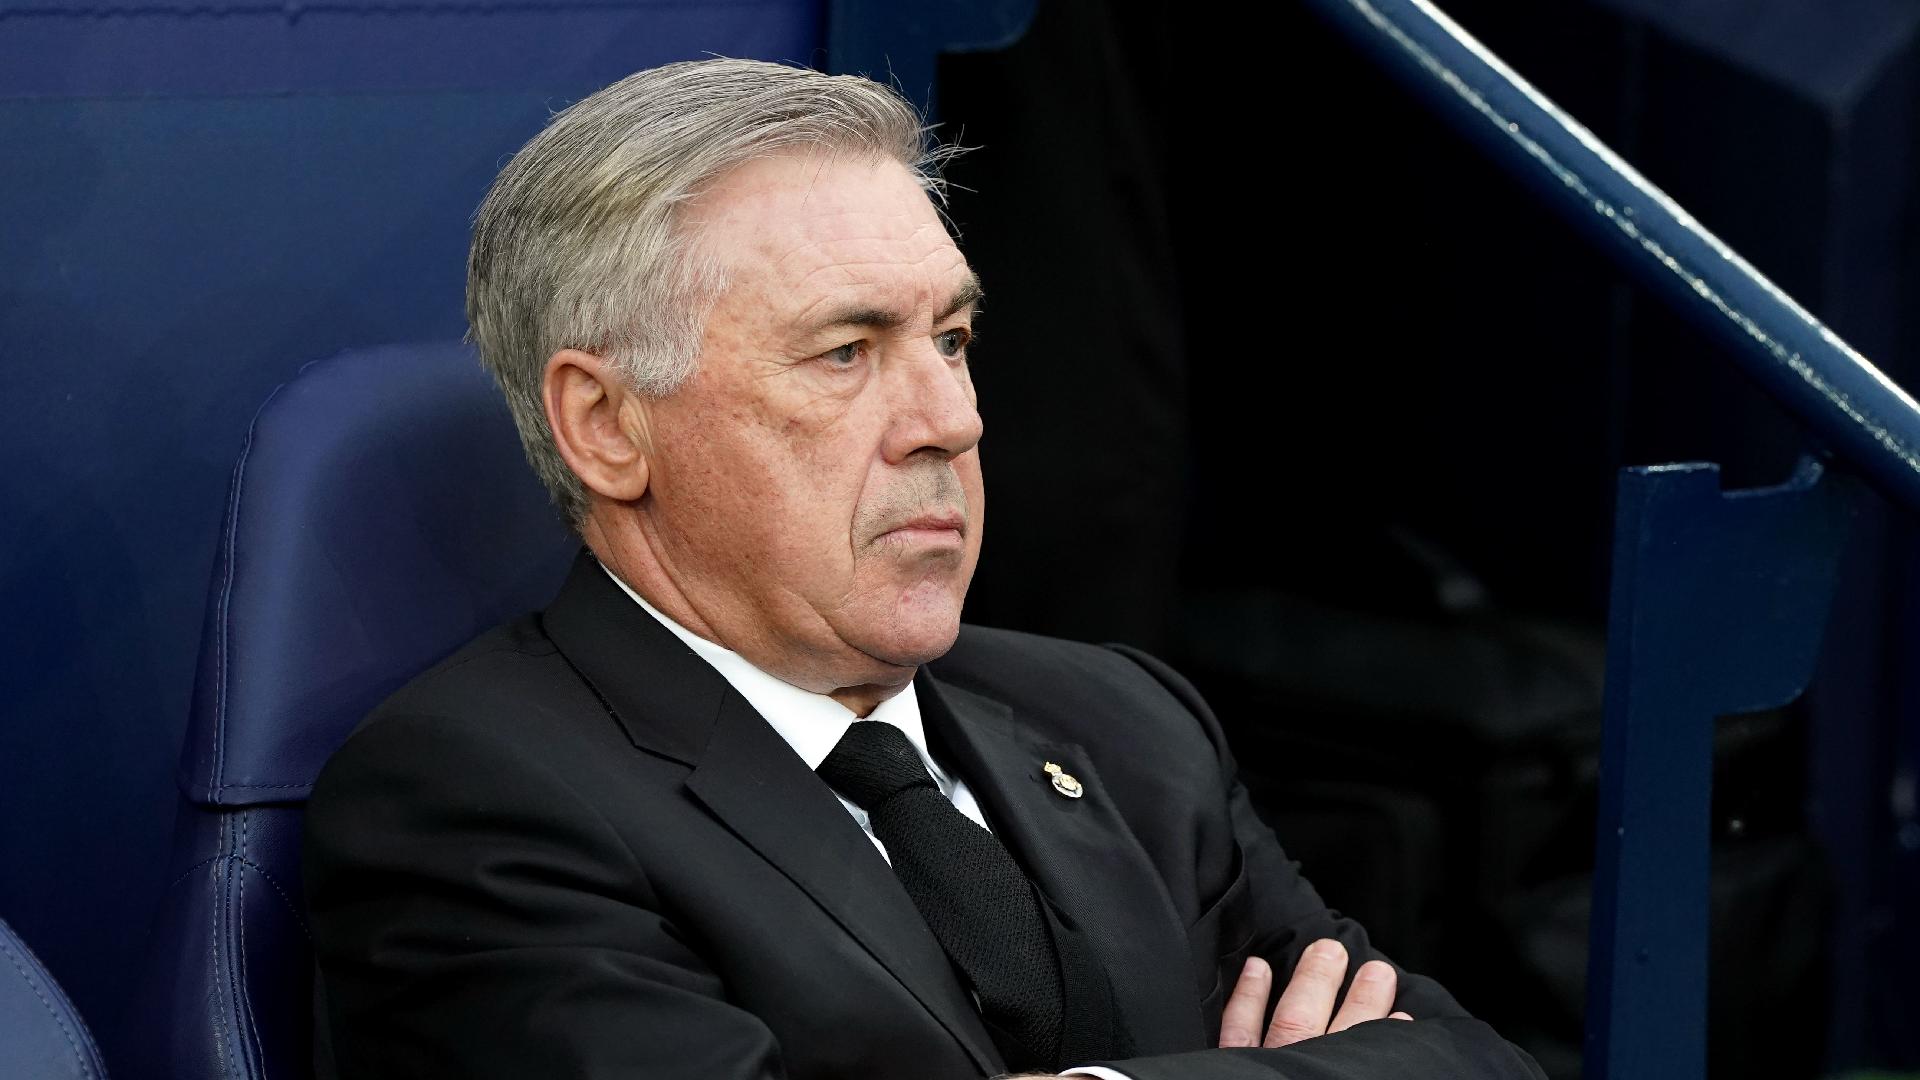 Carlo Ancelotti confident Real Madrid can handle injury problems